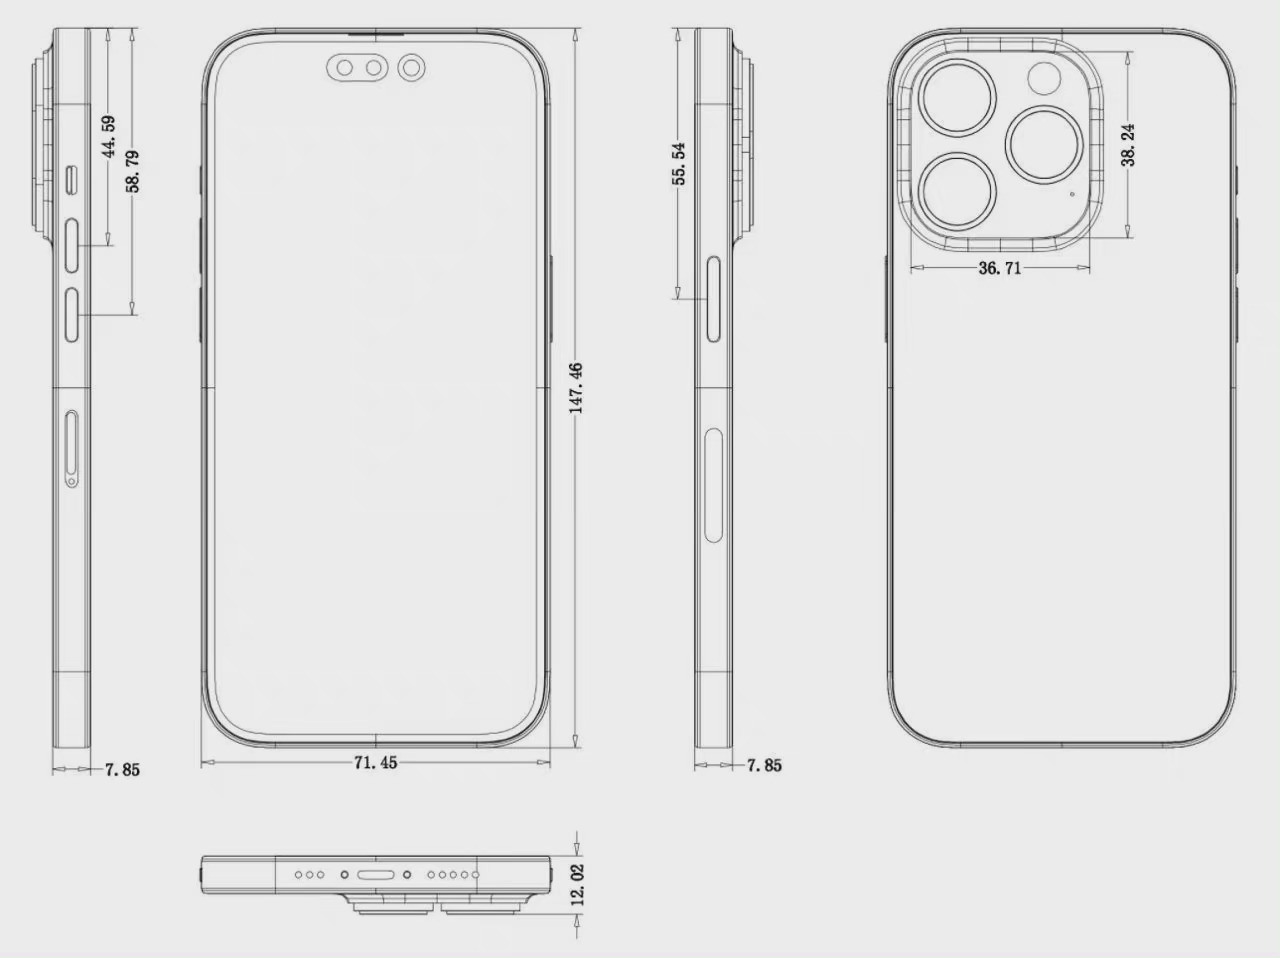 Apple iPhone 5S (7th Gen) Dimensions & Drawings | Dimensions.com